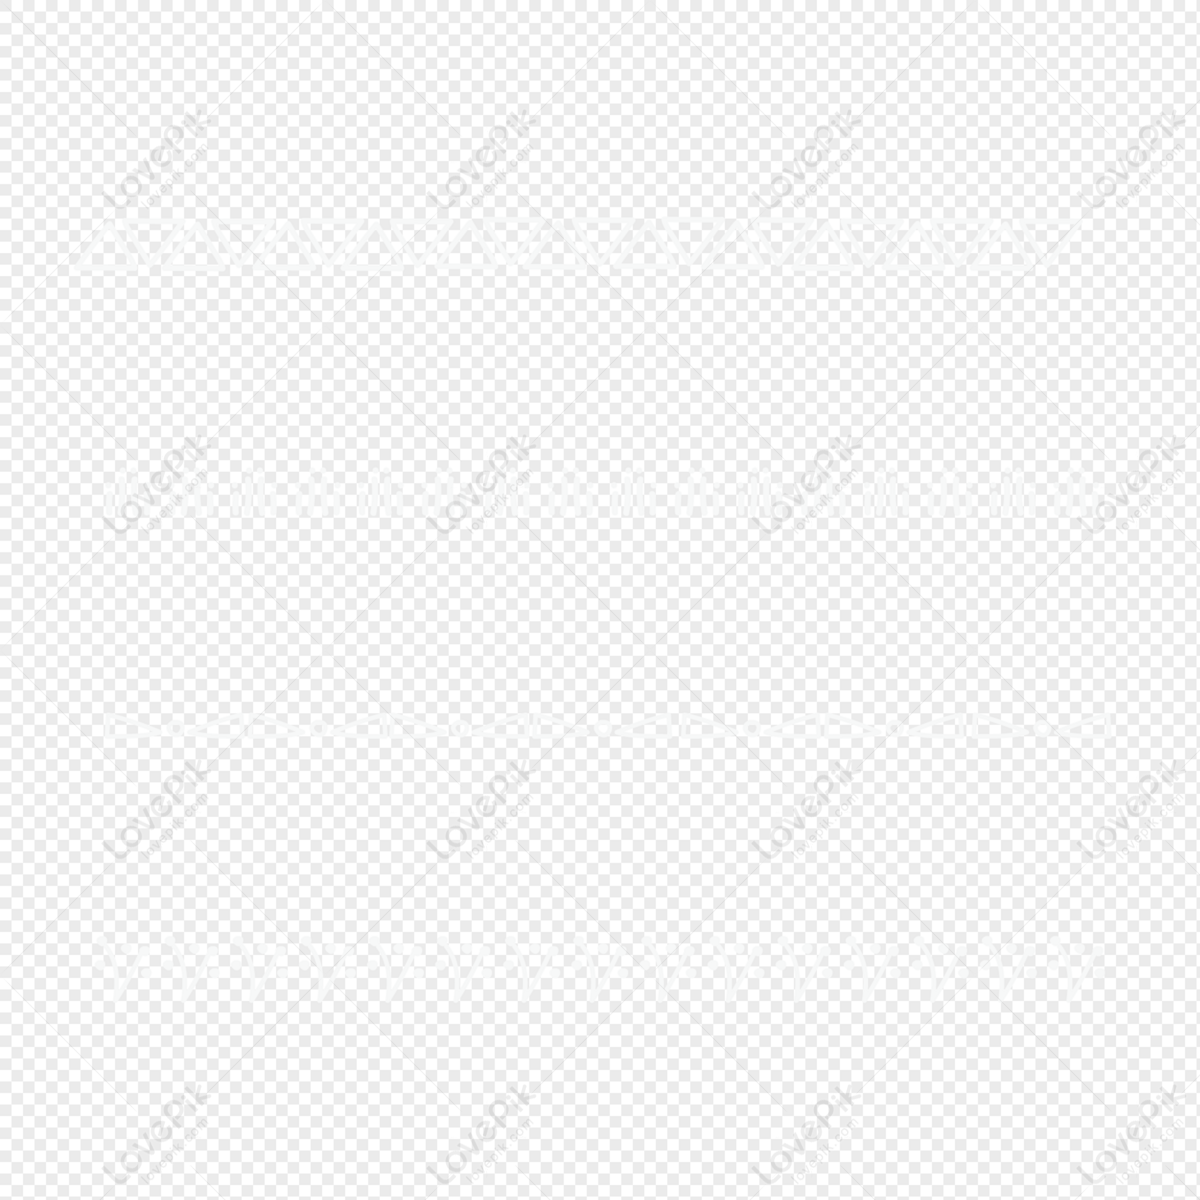 Pattern Dividing Line PNG Image Free Download And Clipart Image For ...